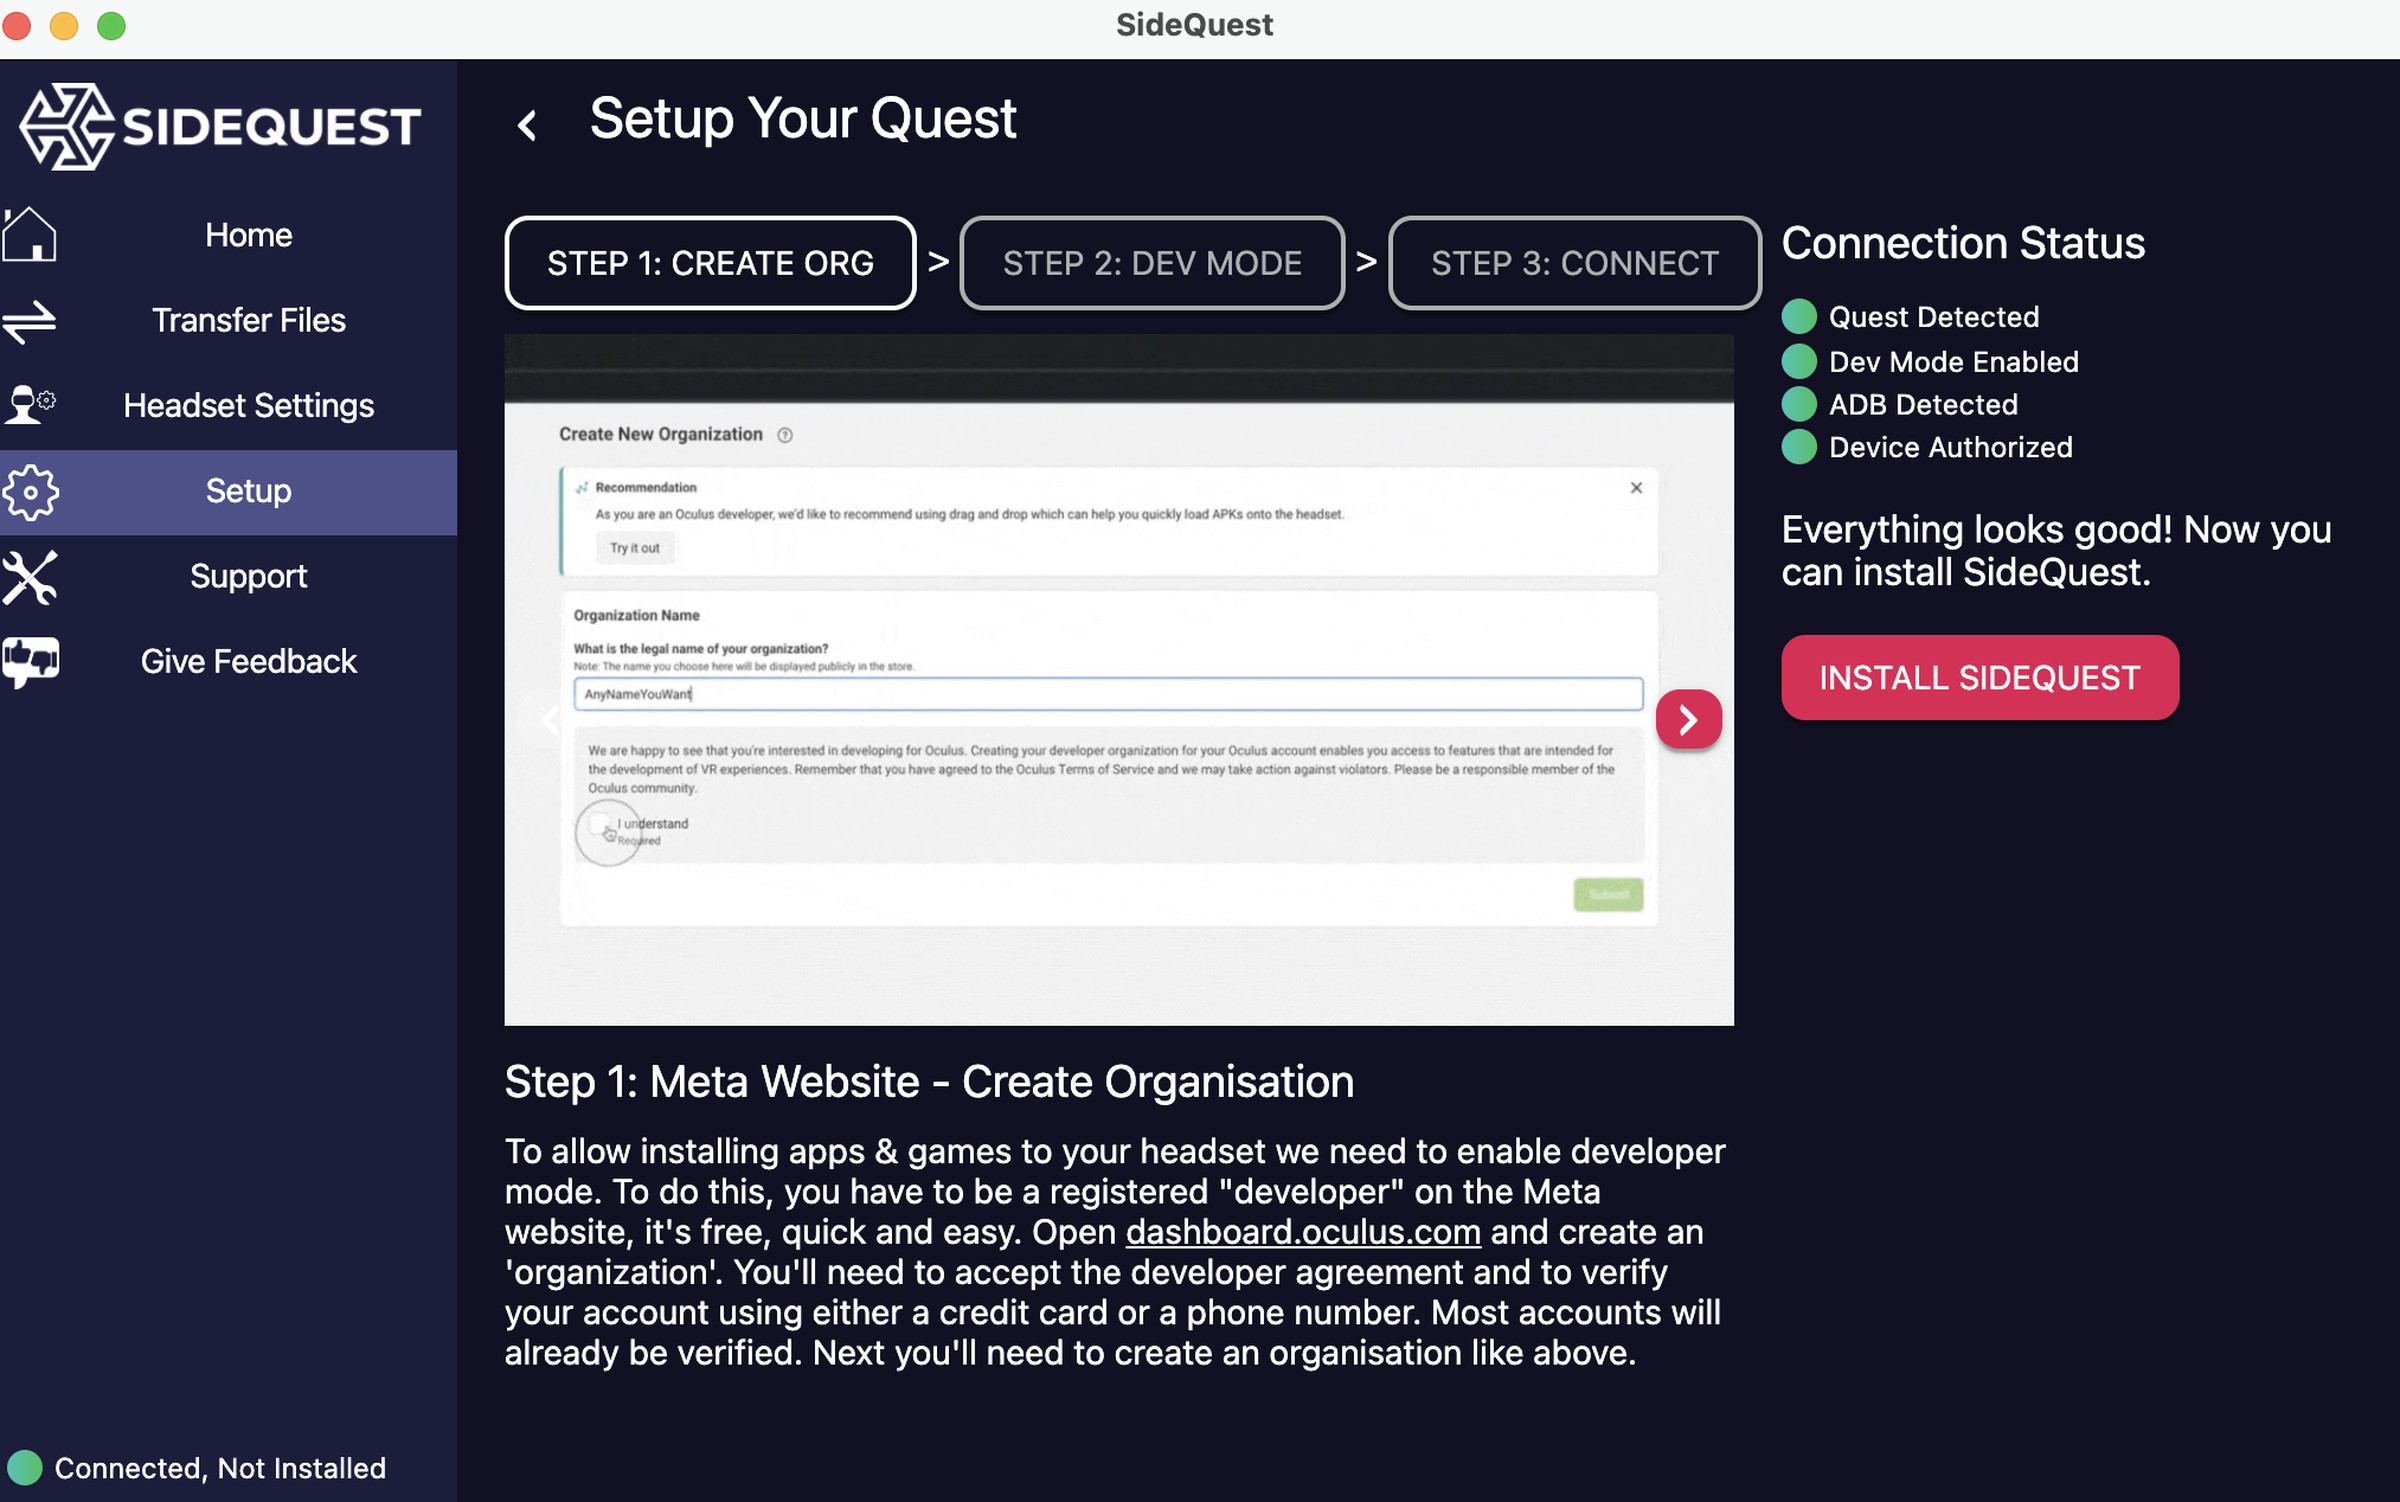 Screenshot of the SideQuest setup UI, with an Install SideQuest button.